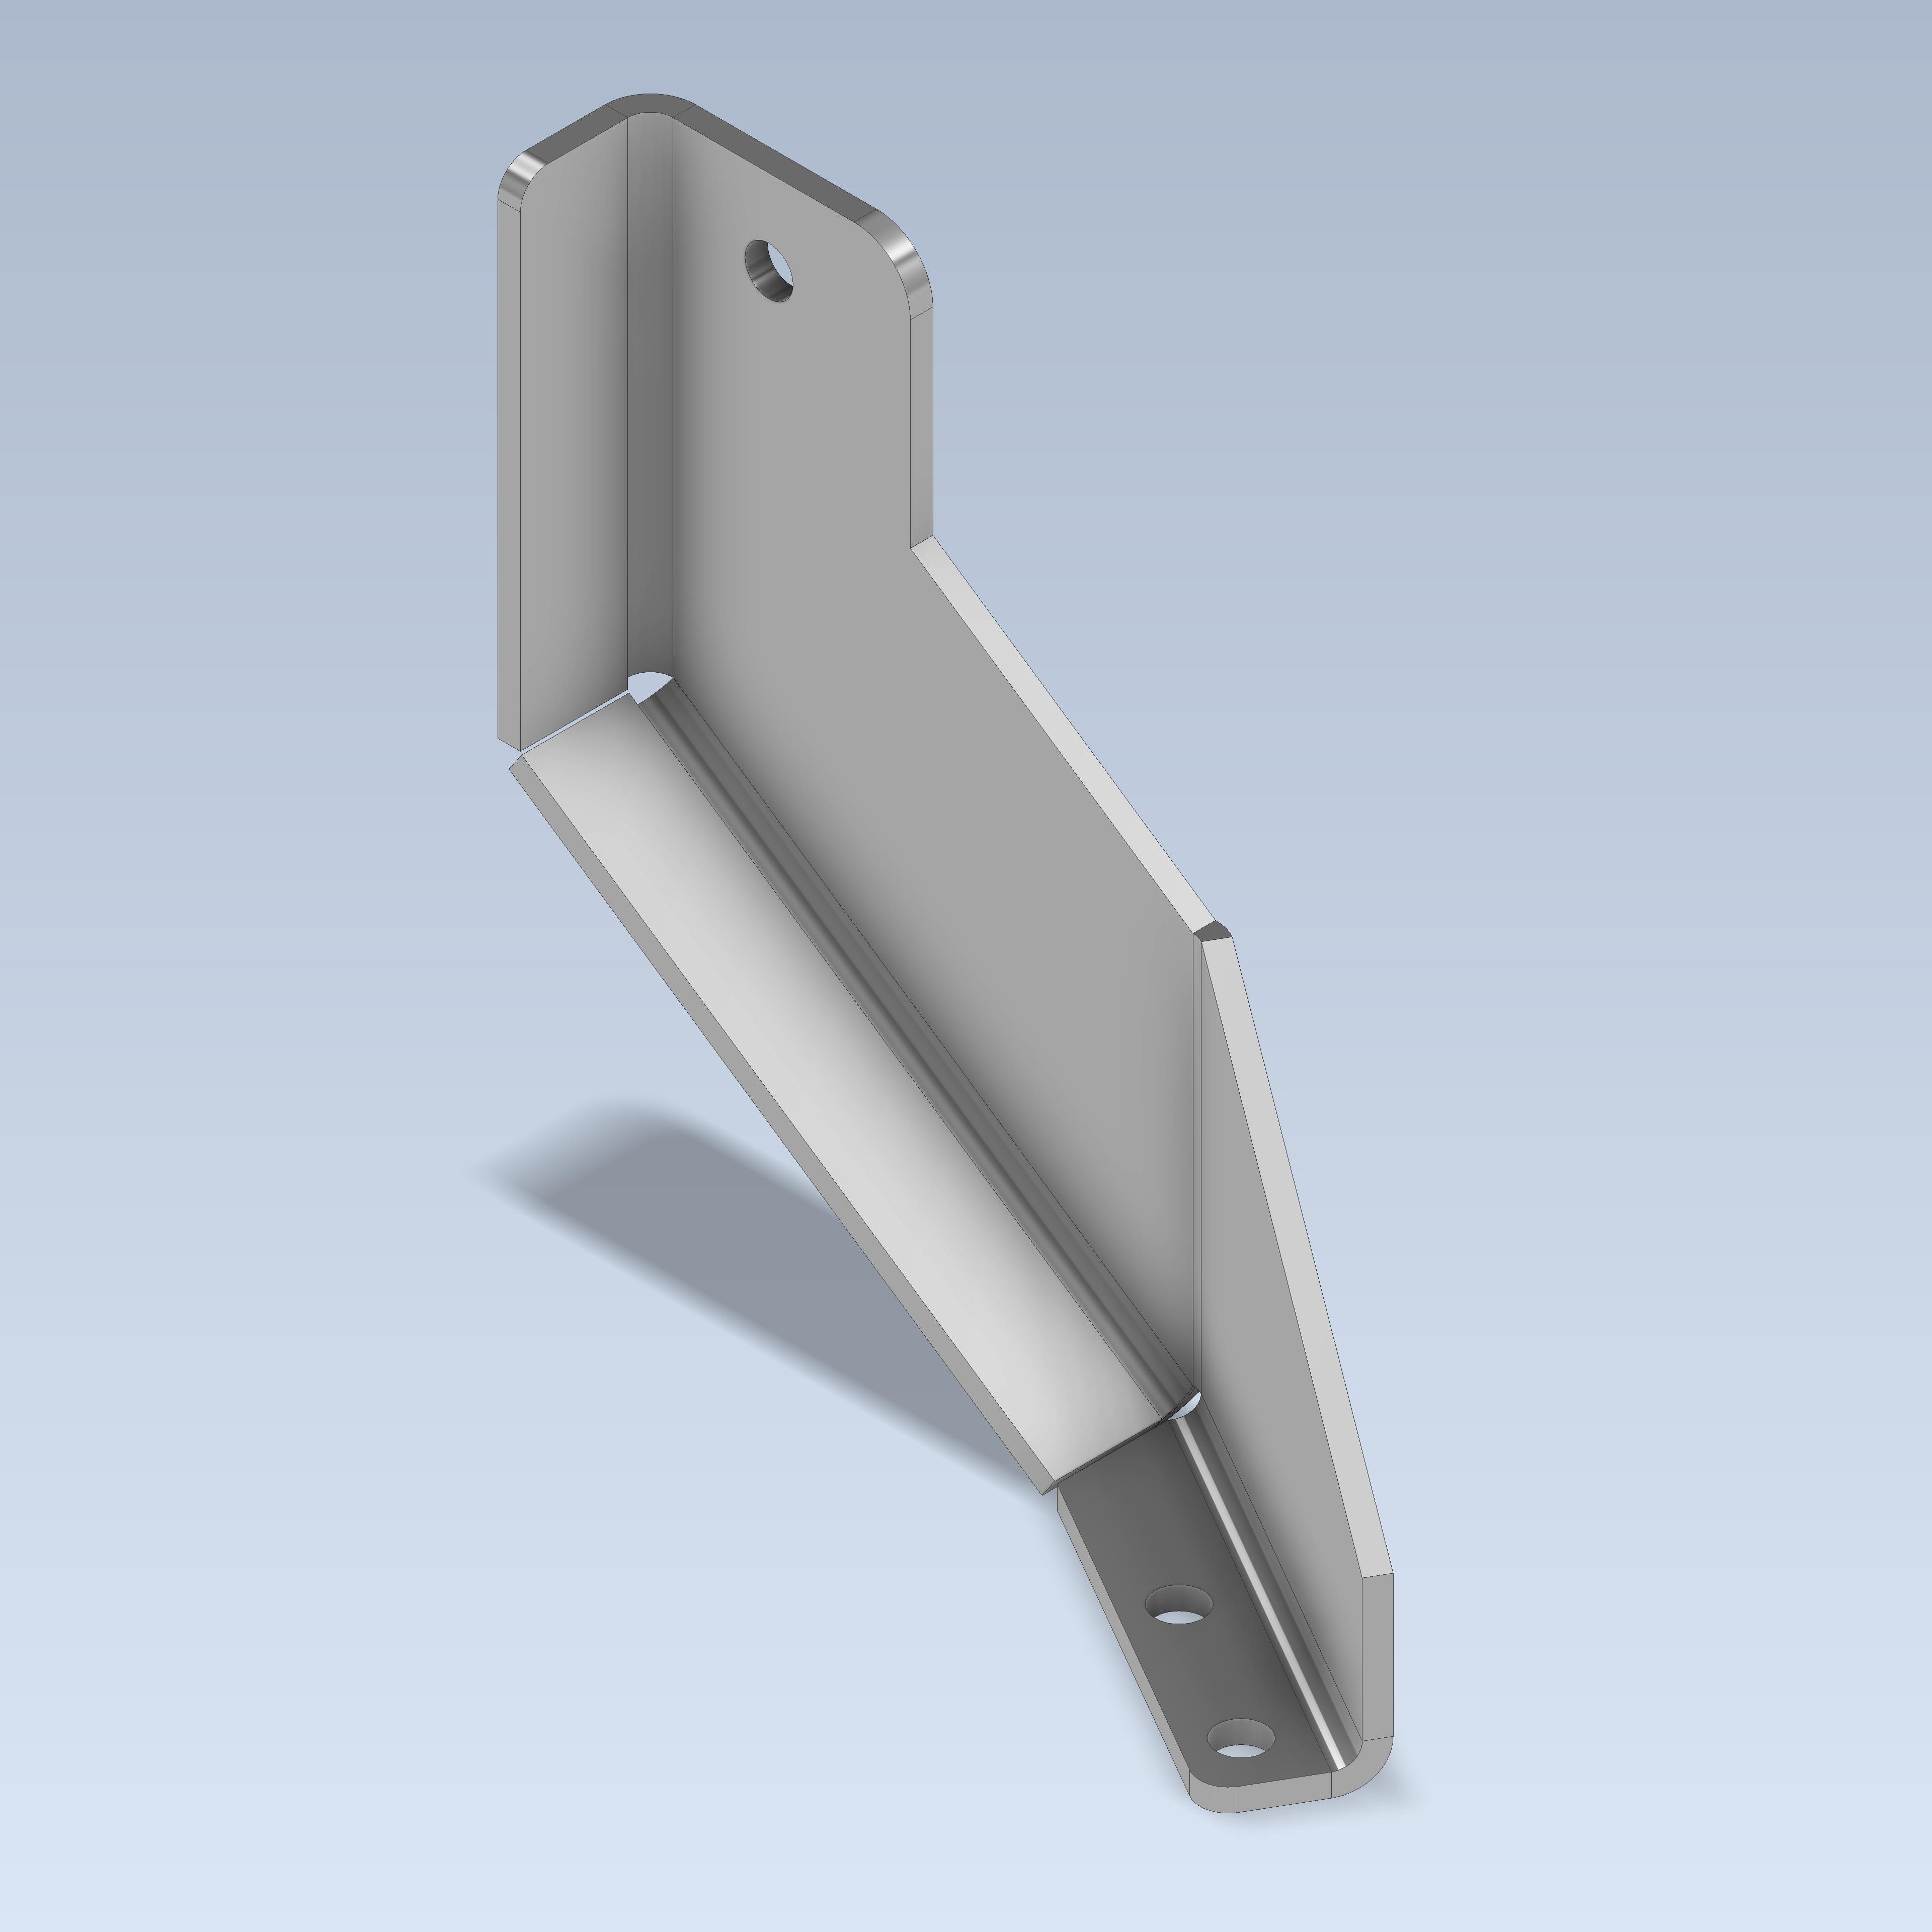 WIRE GUIDE PULLEY SUPPORT